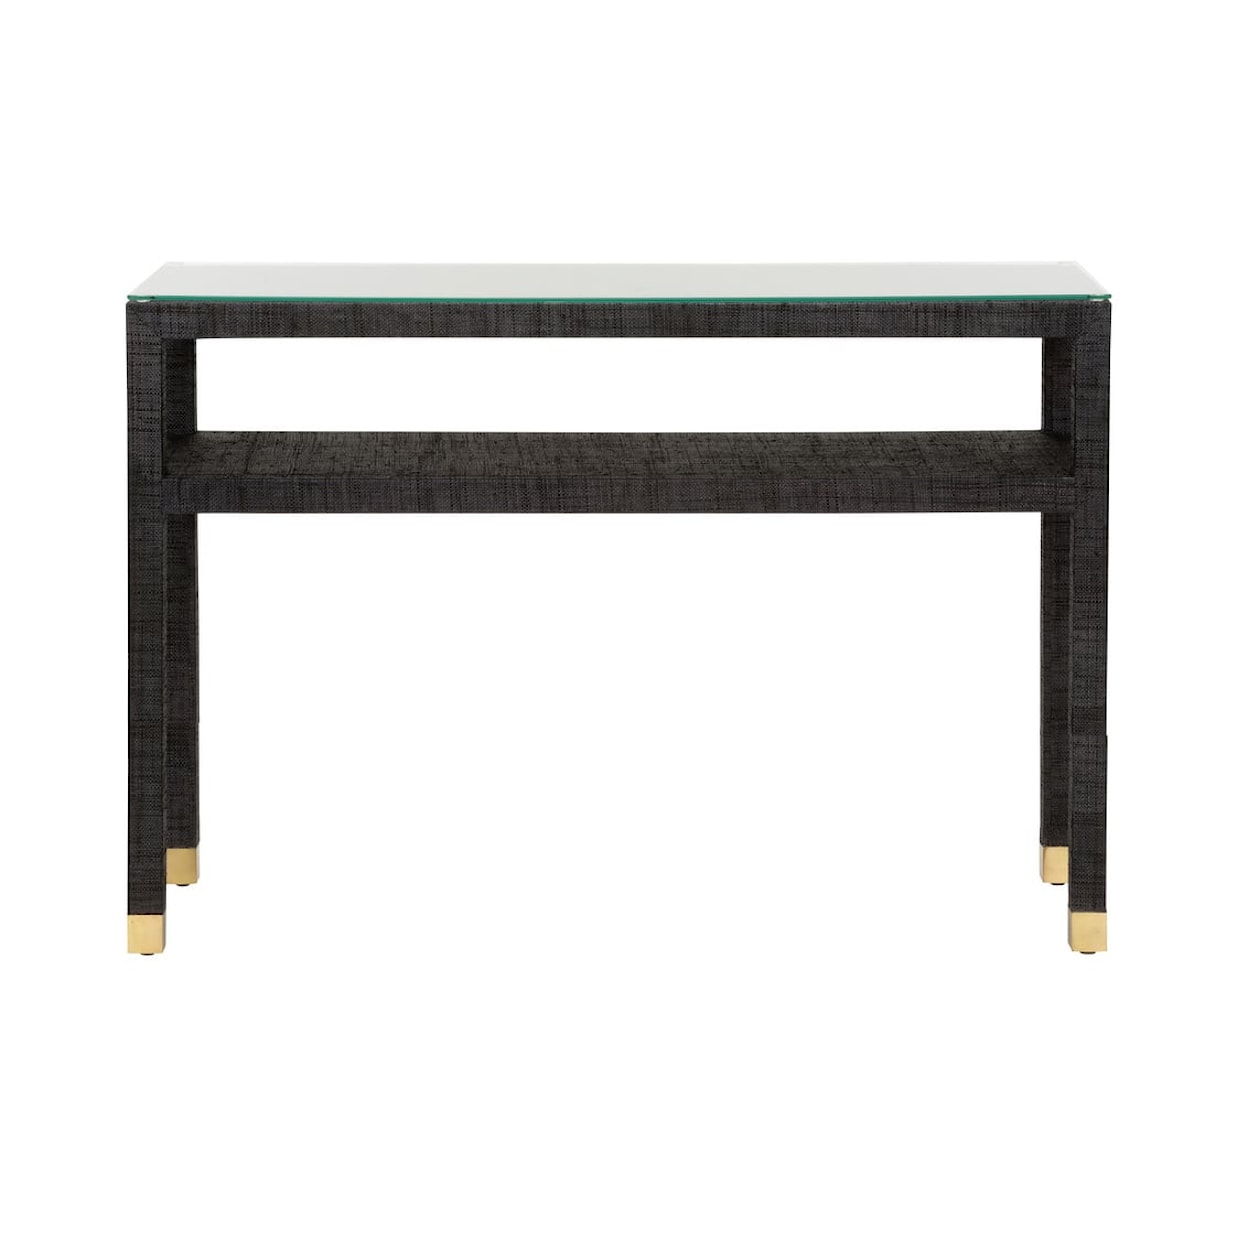 Wildwood Lamps Tables- Console SOCIALITE CONSOLE TABLE- BLACK